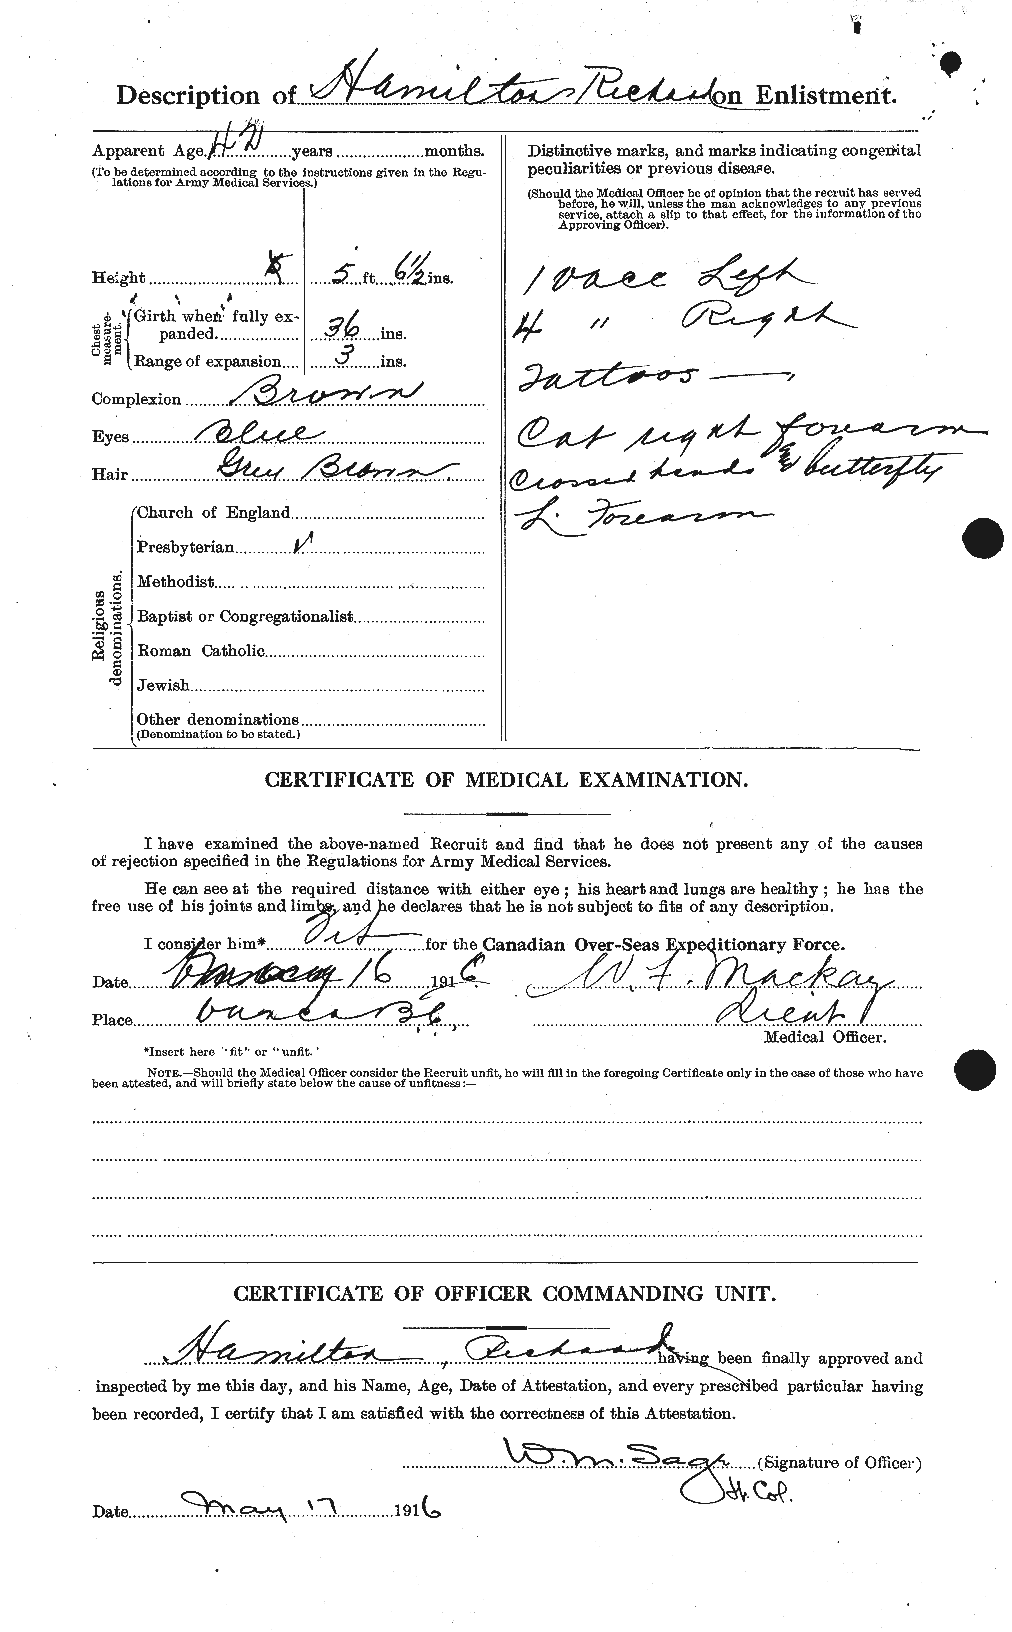 Personnel Records of the First World War - CEF 373215b